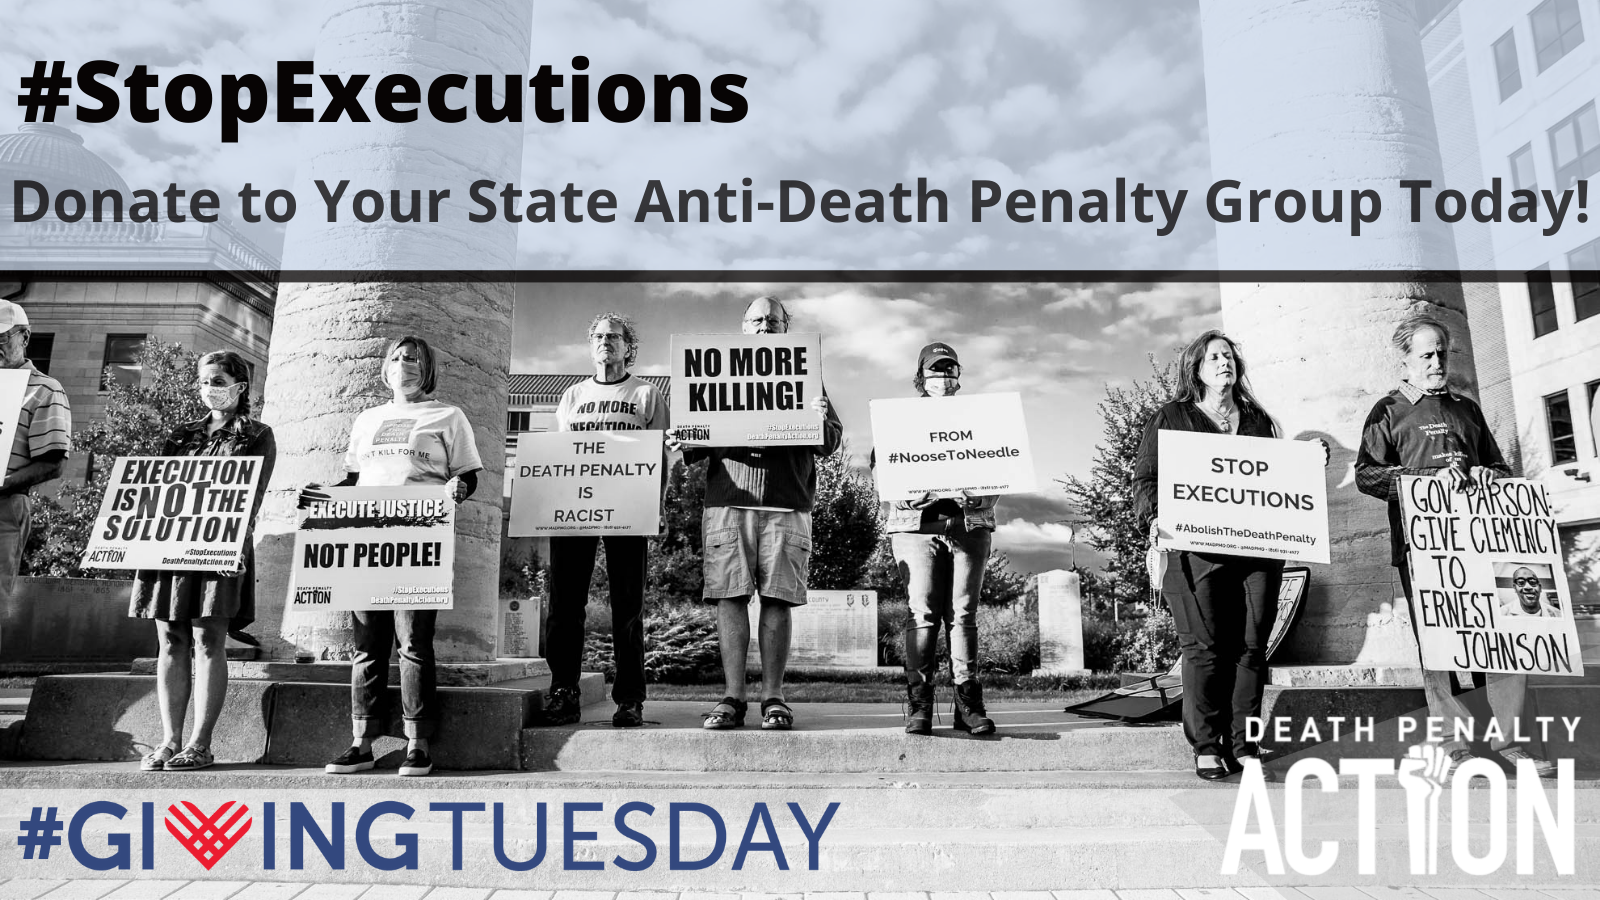 Image of execution protesters and the request to support your state anti-death penalty organization.